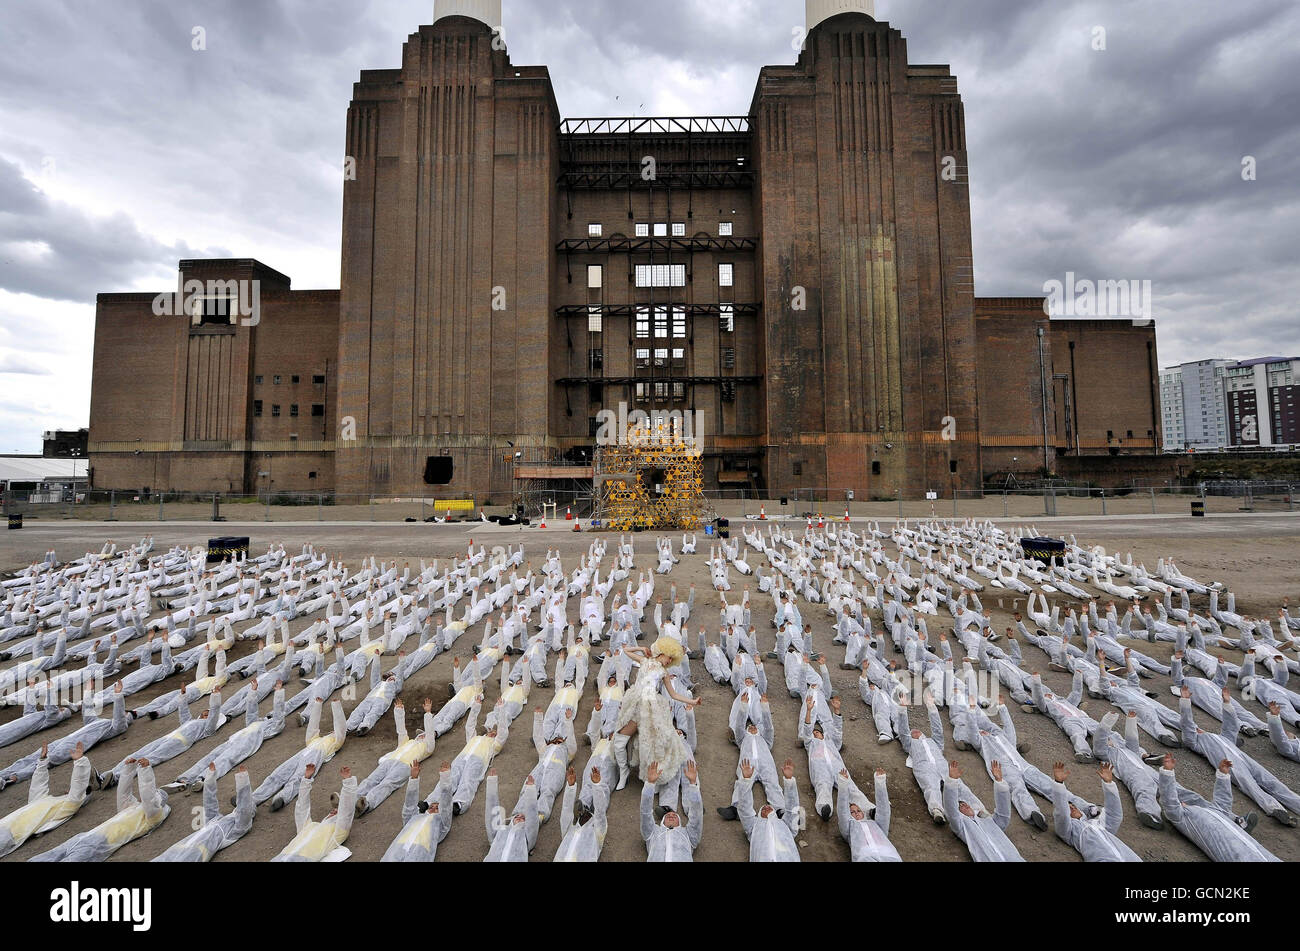 Around 500 actors for The National Youth Theatre of Great Britain perform S'Warm at Battersea Power Station in London to raise awareness of the alleged global environmental crisis caused by dwindling bee populations. Stock Photo